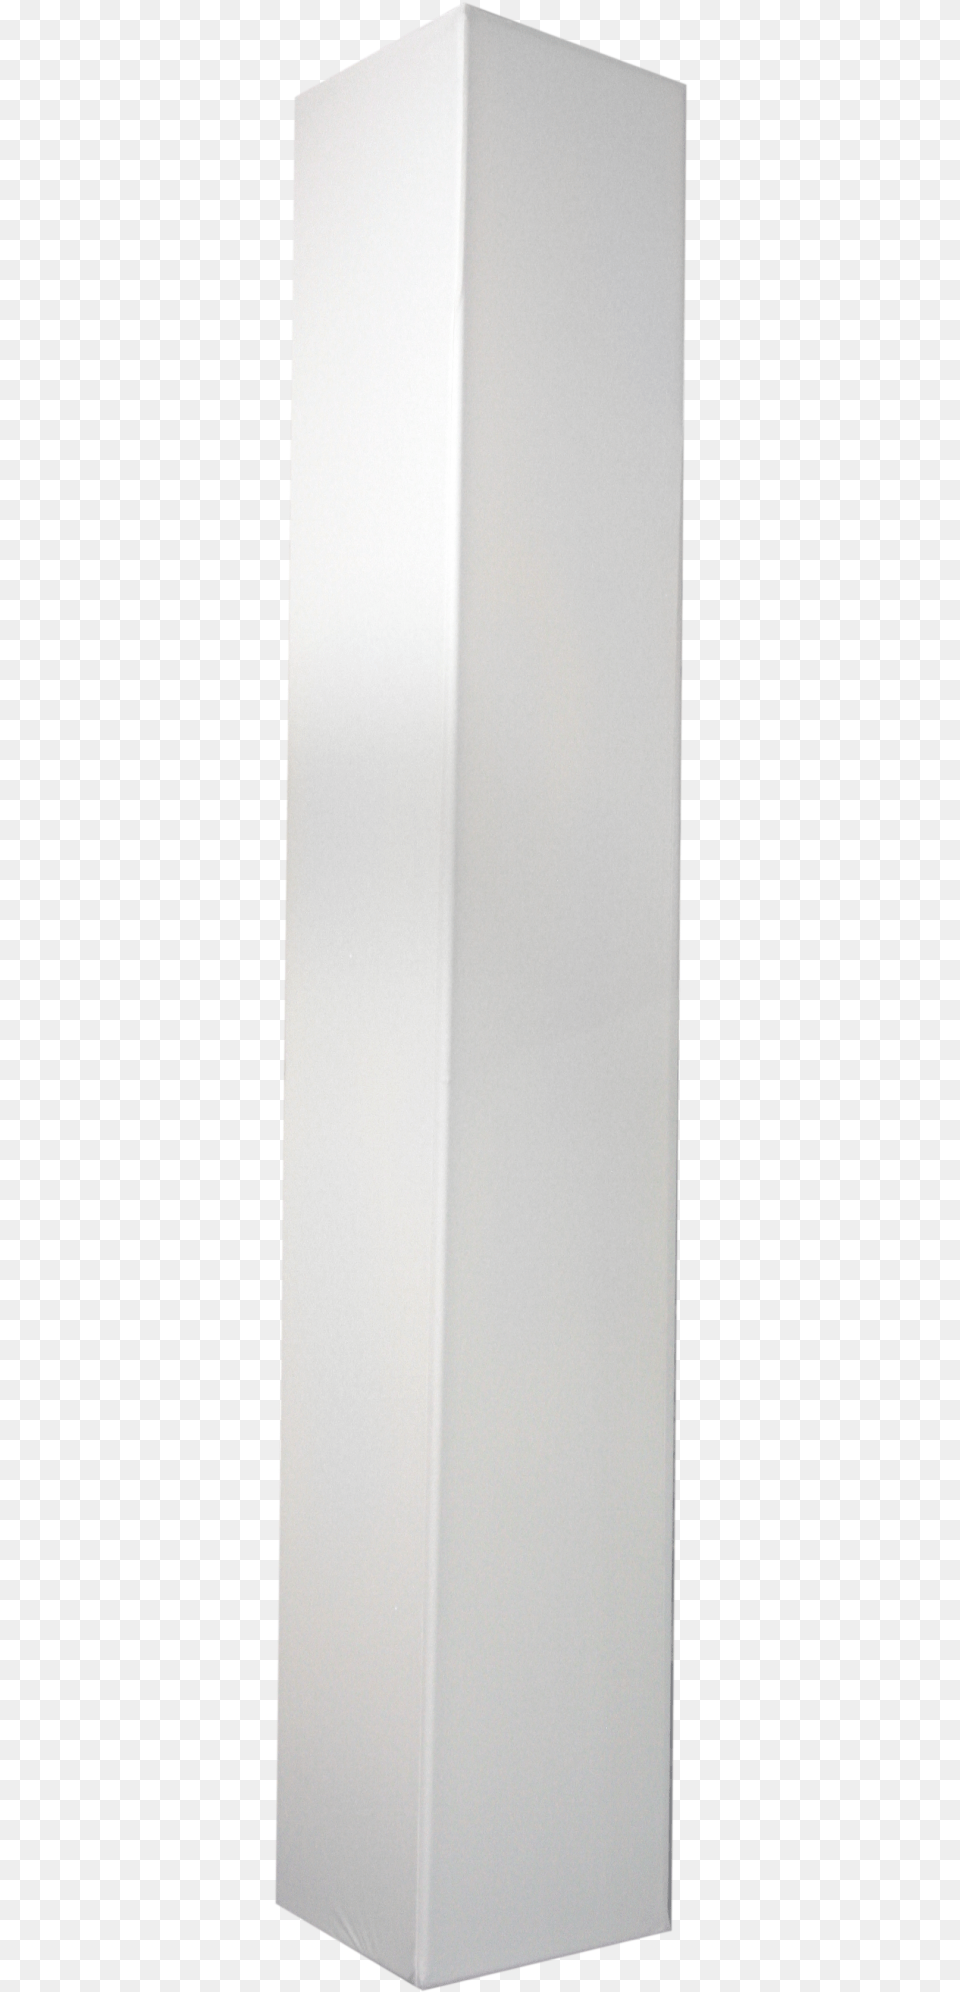 Column, Device, Appliance, Electrical Device Png